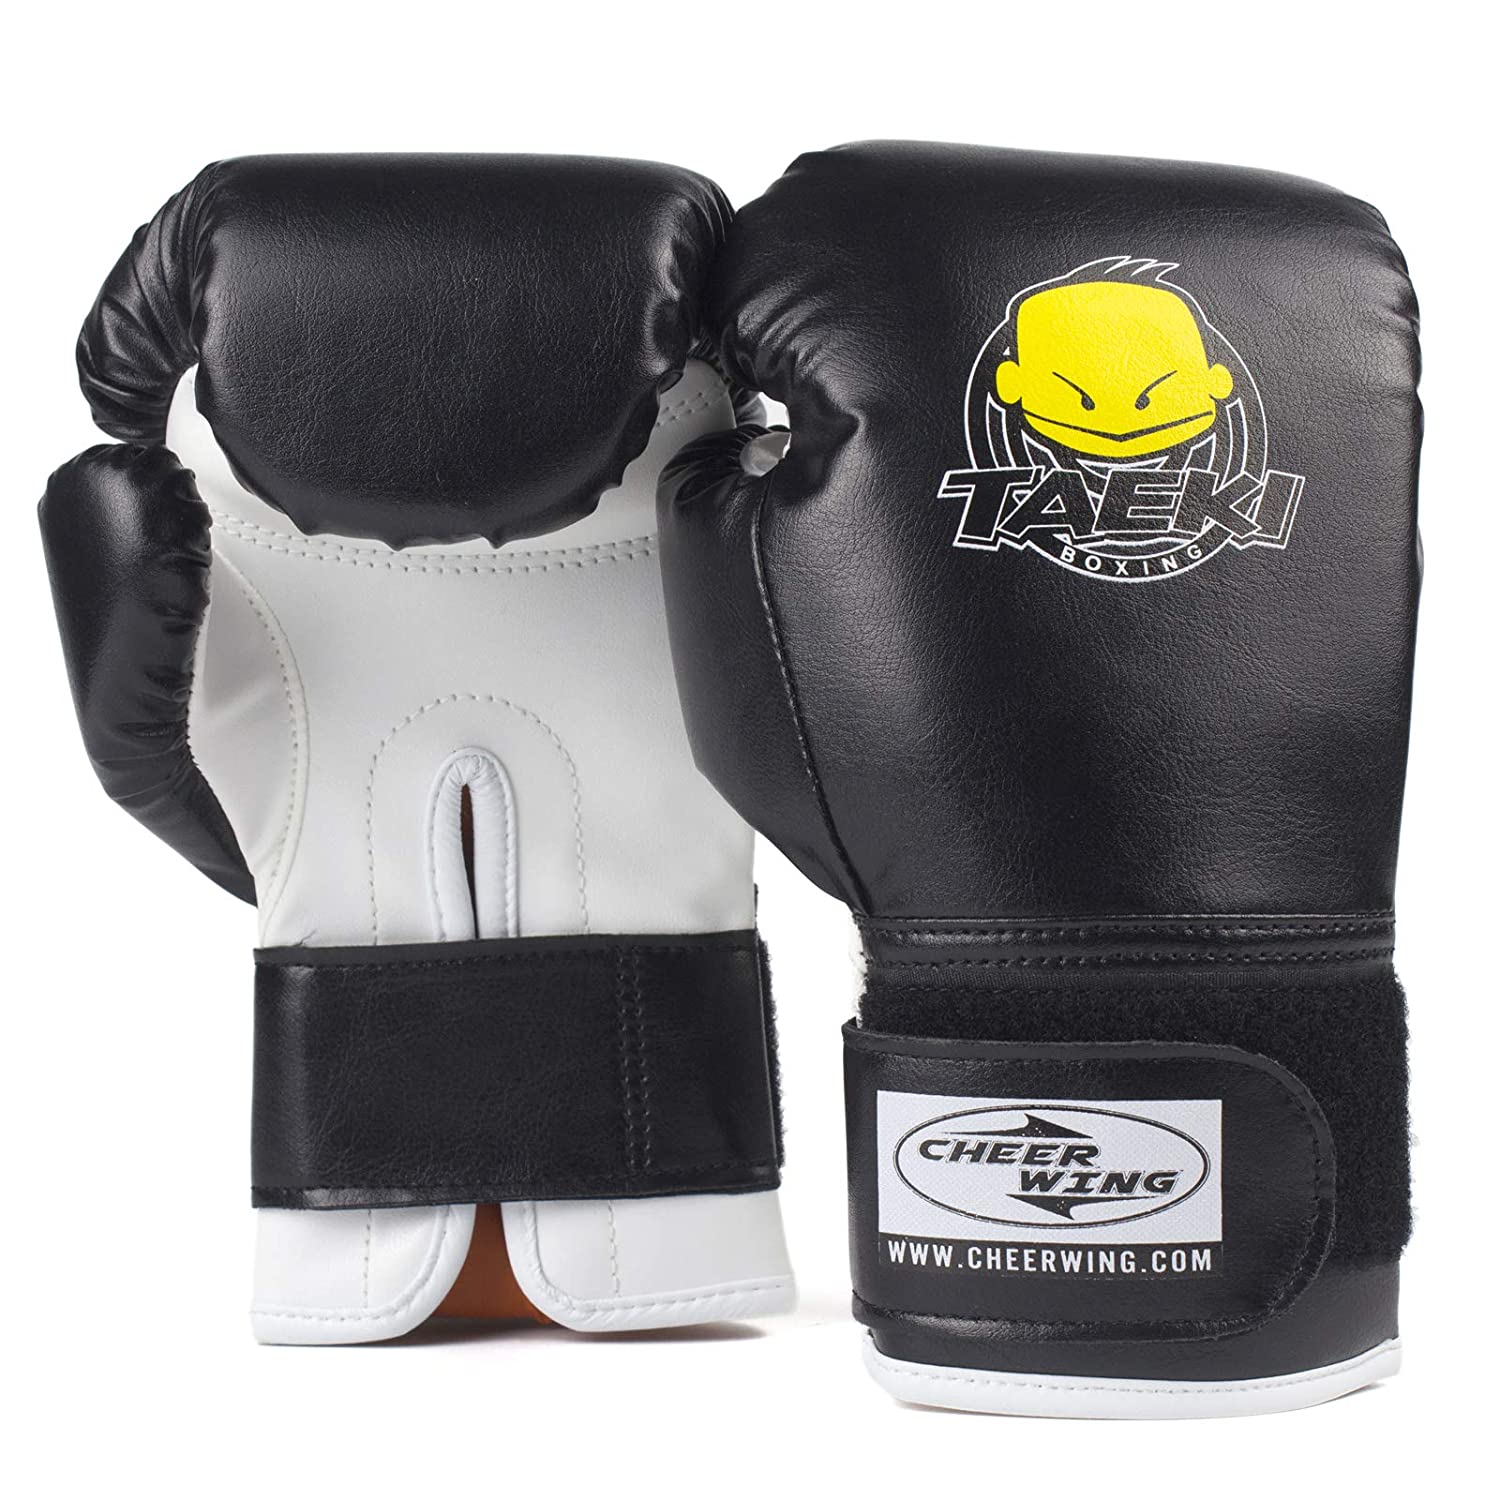 Cheerwing Kids Boxing Gloves 4oz Training Gloves